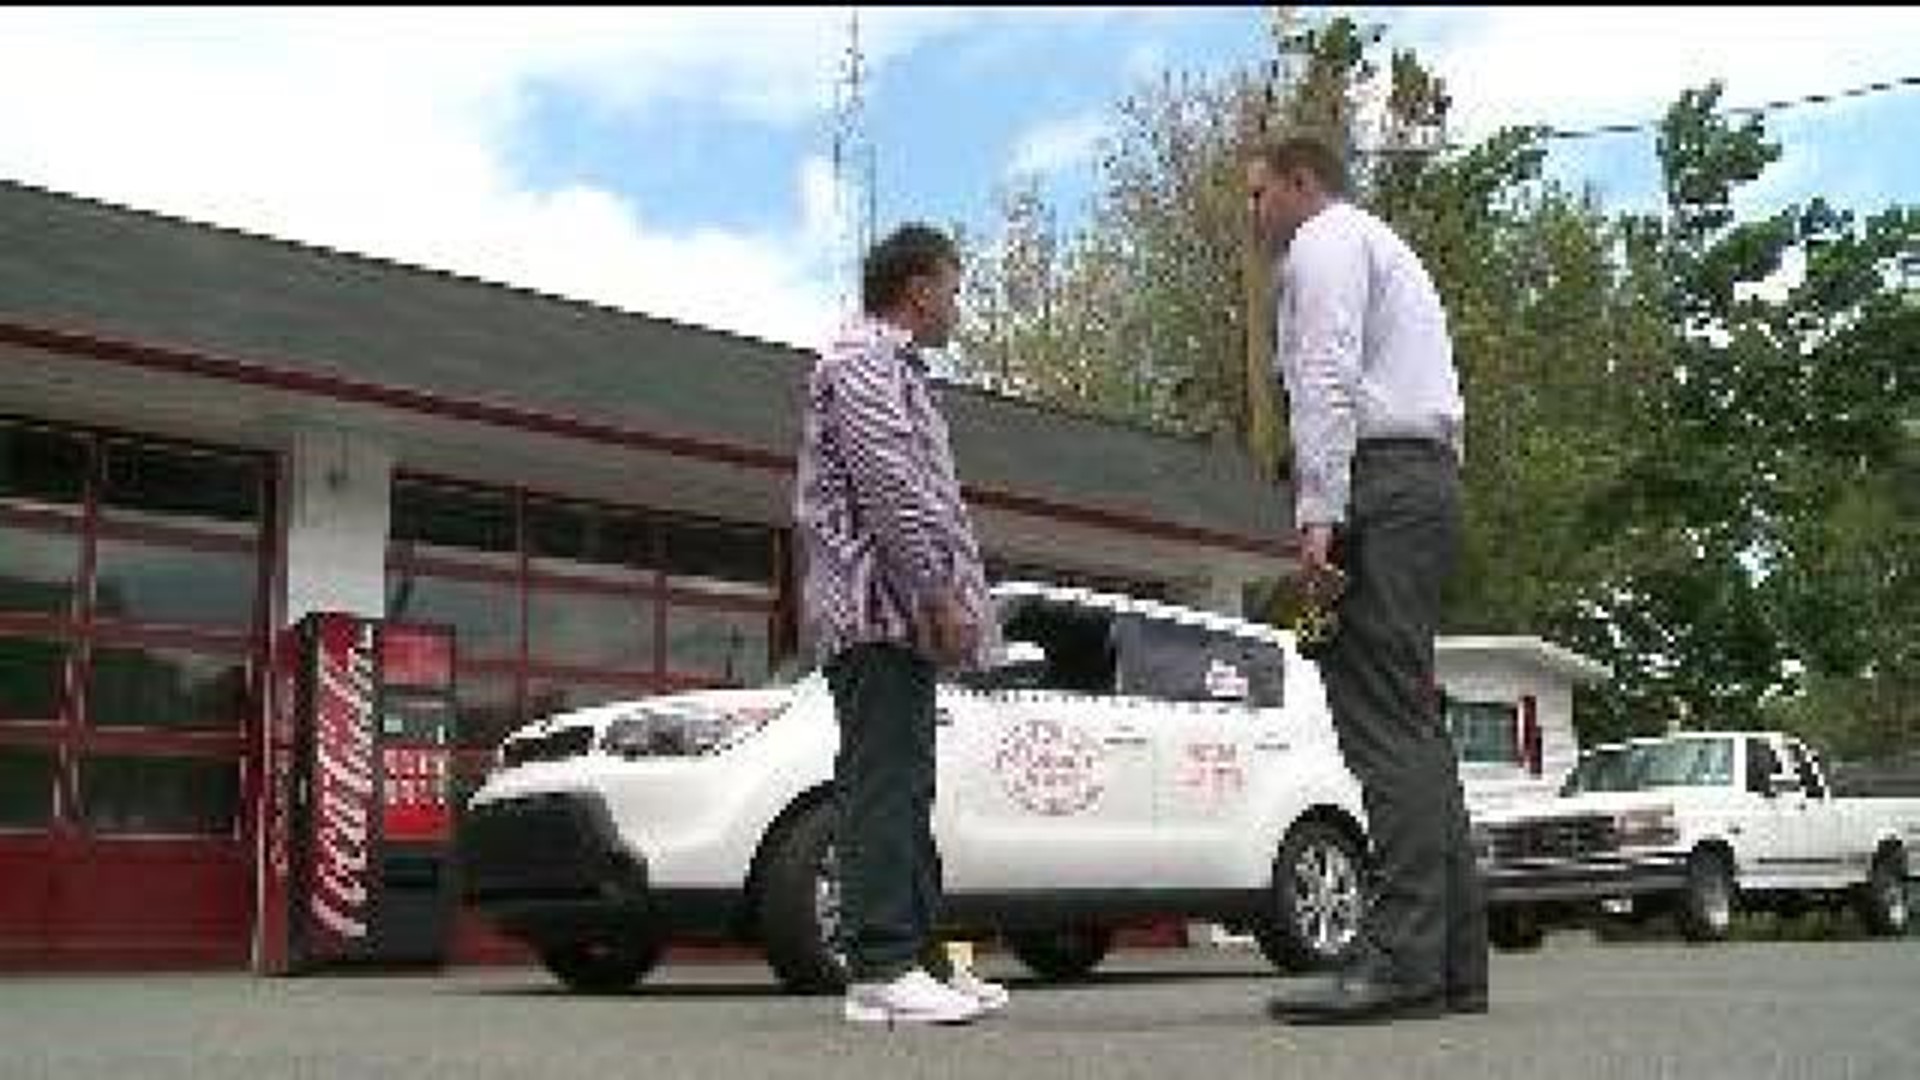 New Technology in Taxis Deterring Crime in Wilkes-Barre